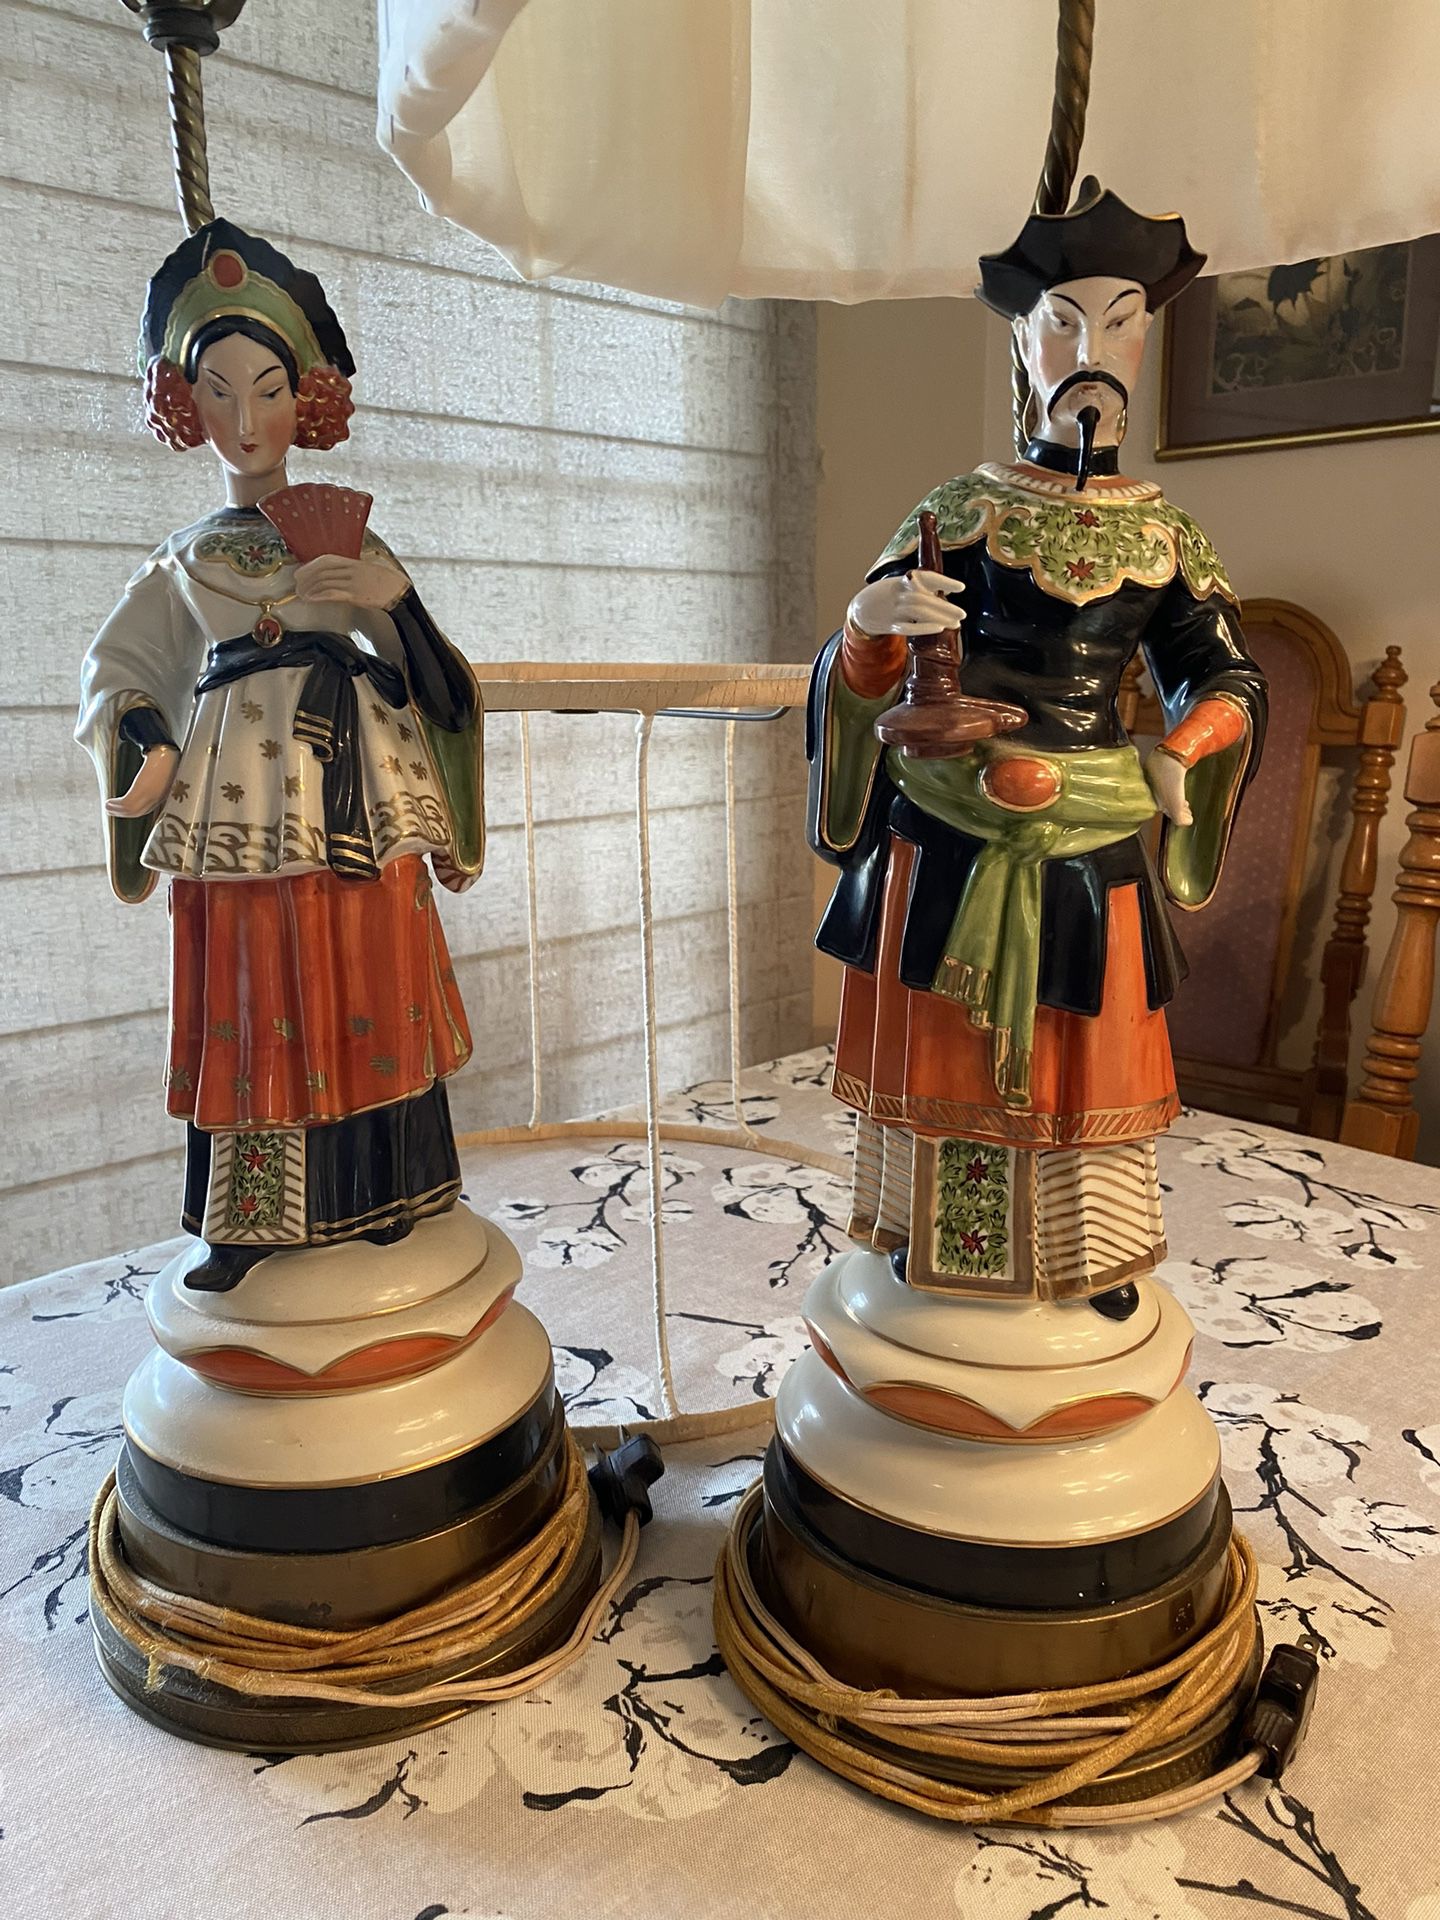 Antique Chinese Style Figural Ceramic Lamps